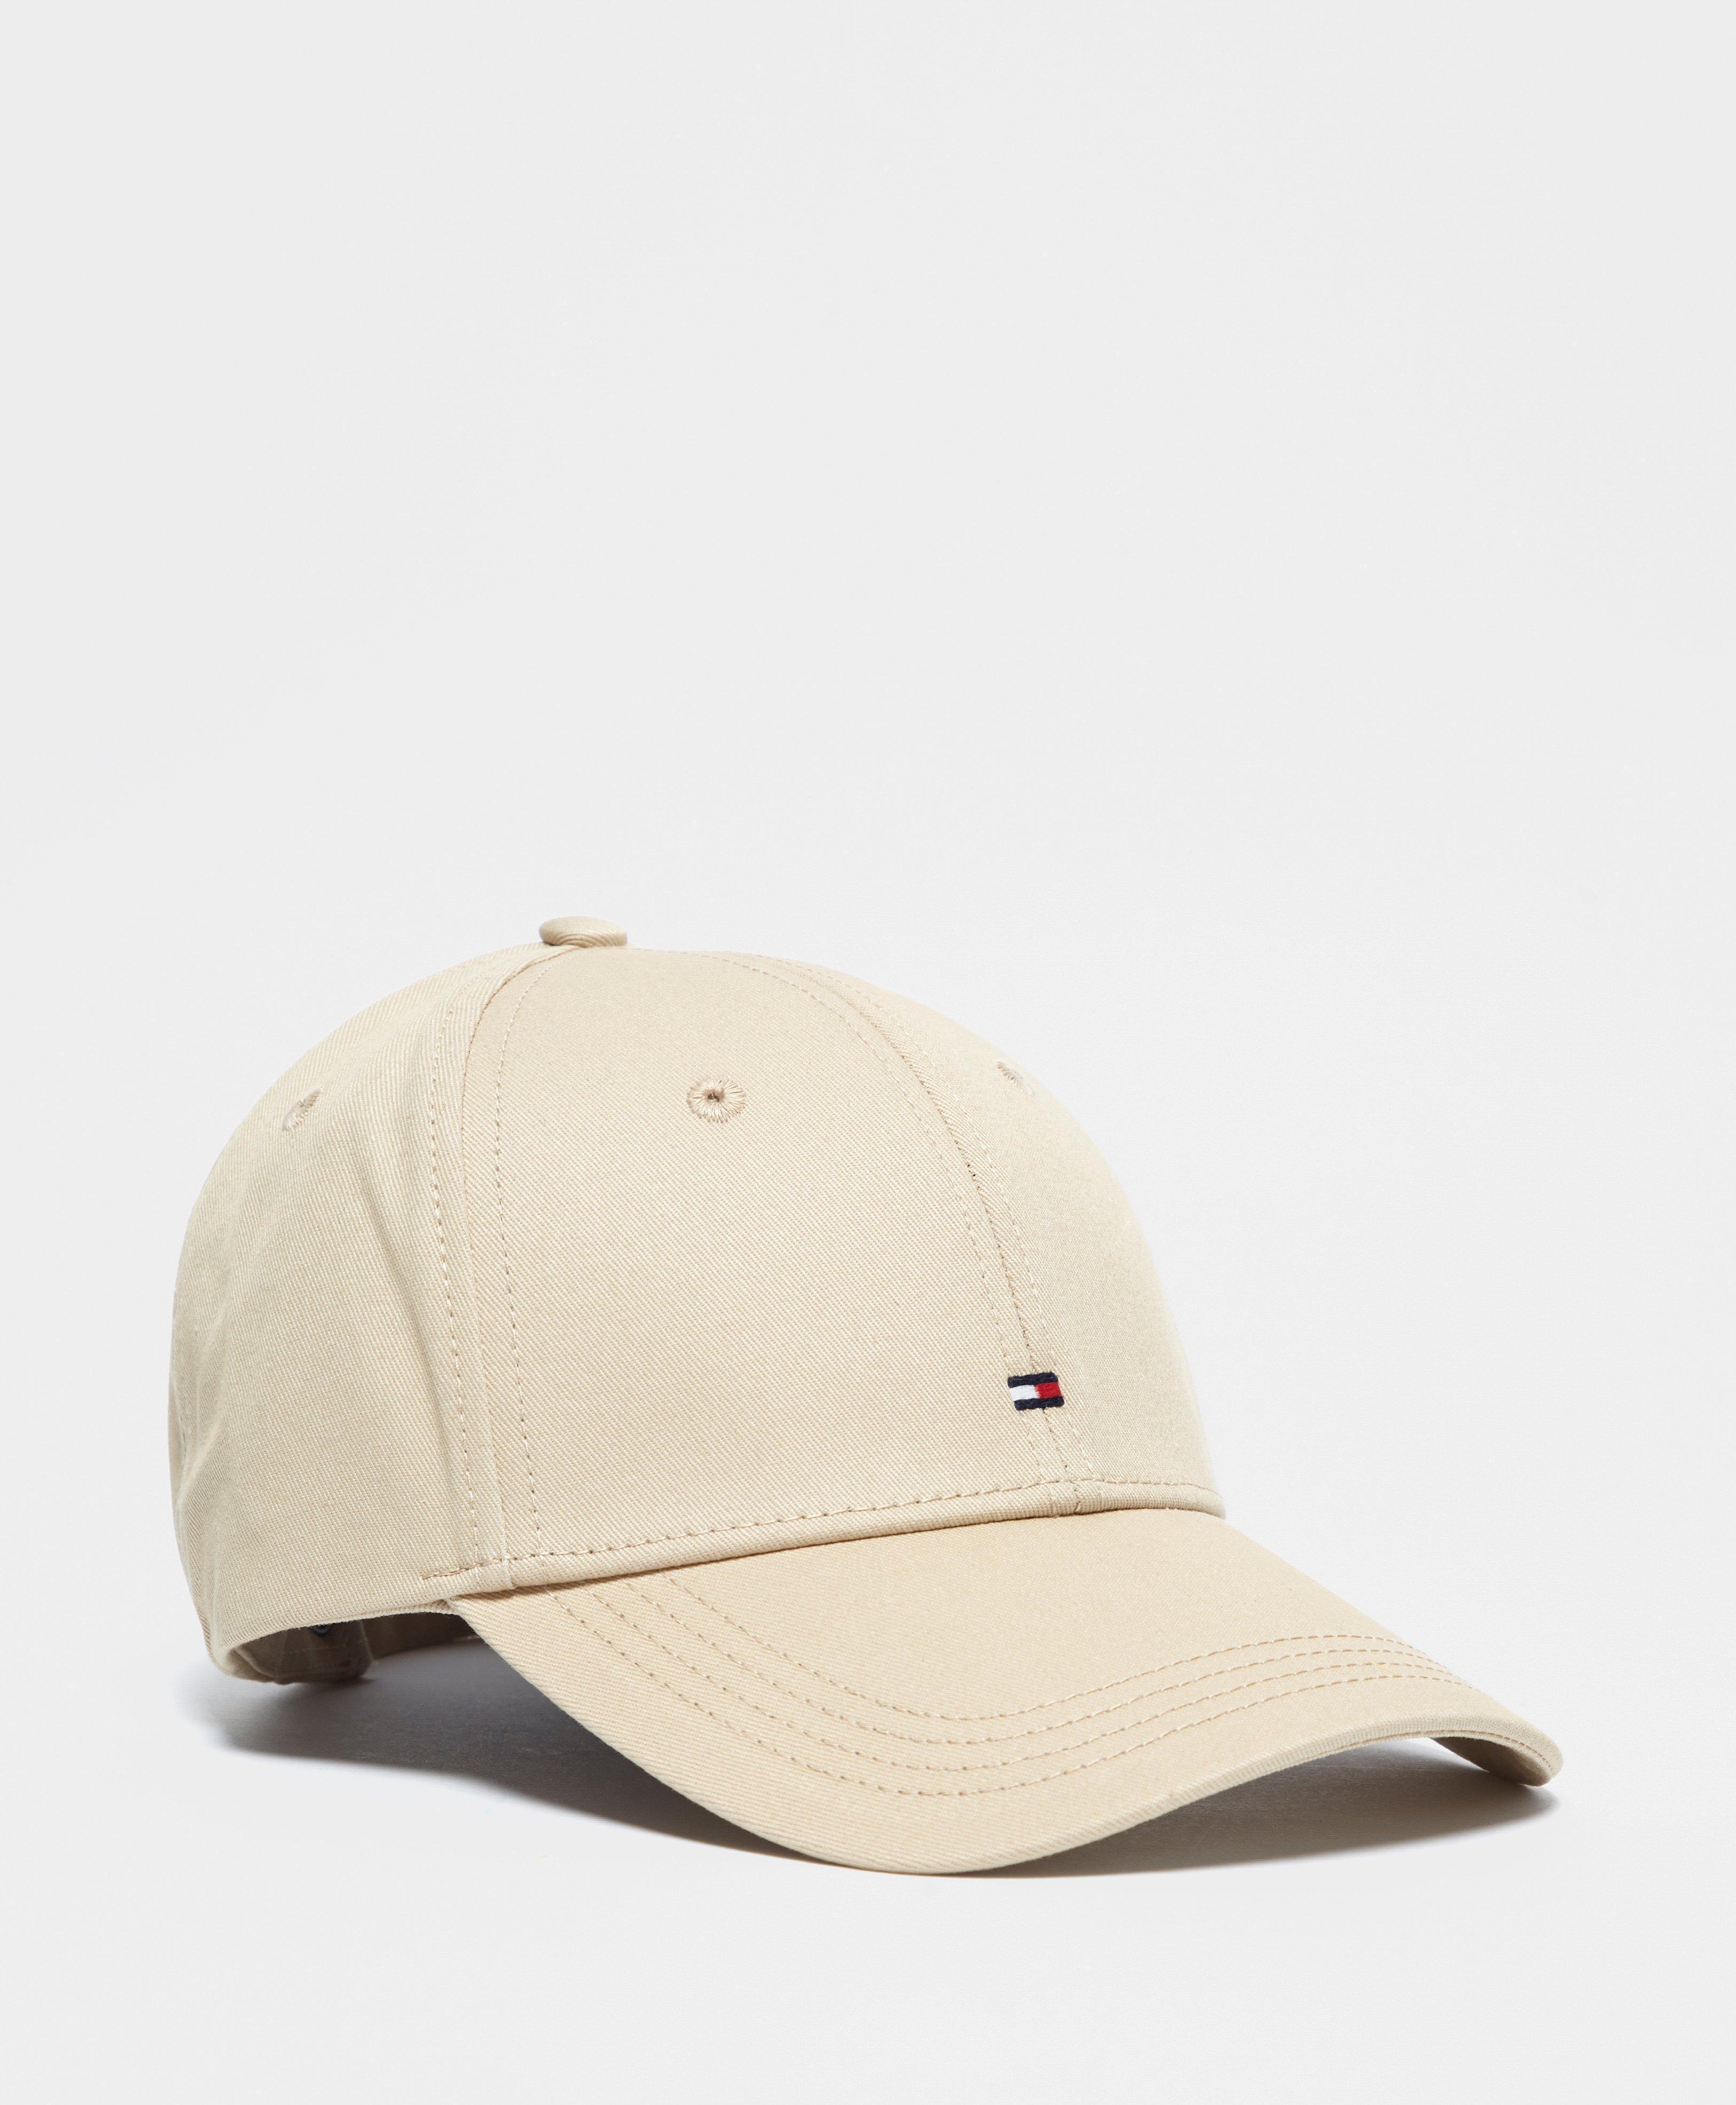 Tommy Hilfiger Flag Cap (Navy/Beige), Men\'s Fashion, Watches & Accessories,  Caps & Hats on Carousell